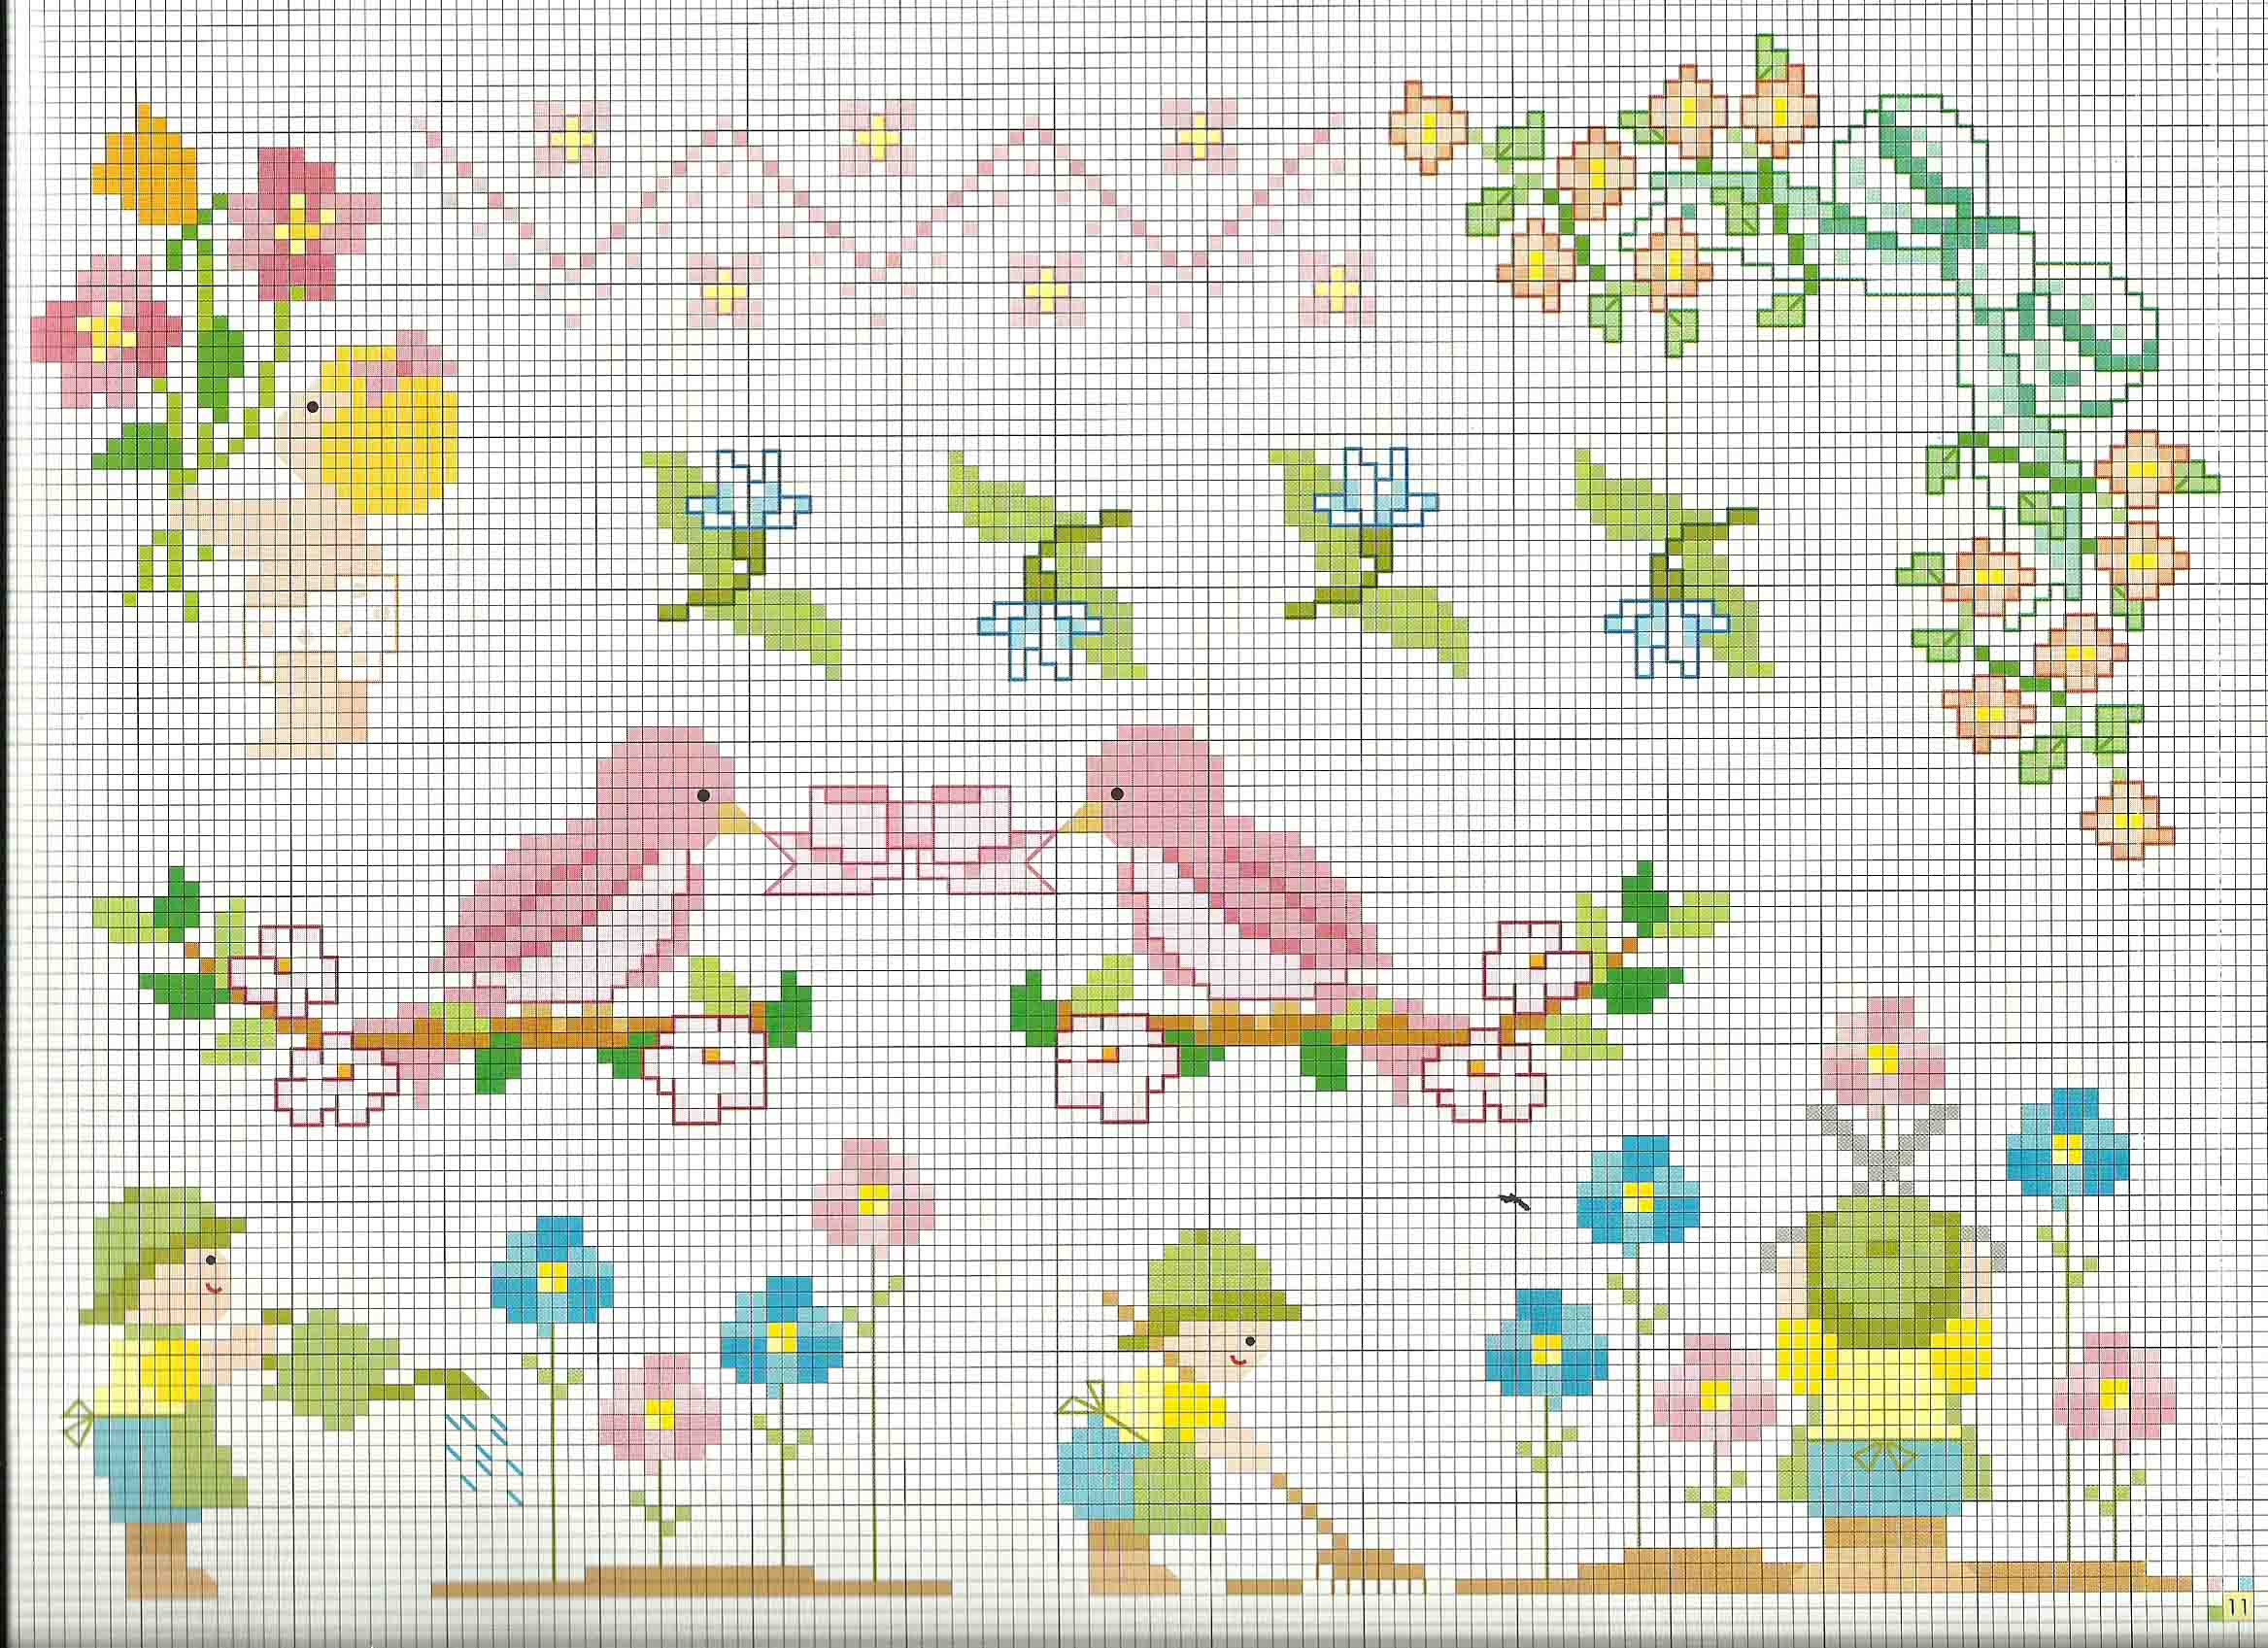 Cross stitch patterns for baby blankets with birds and gardening